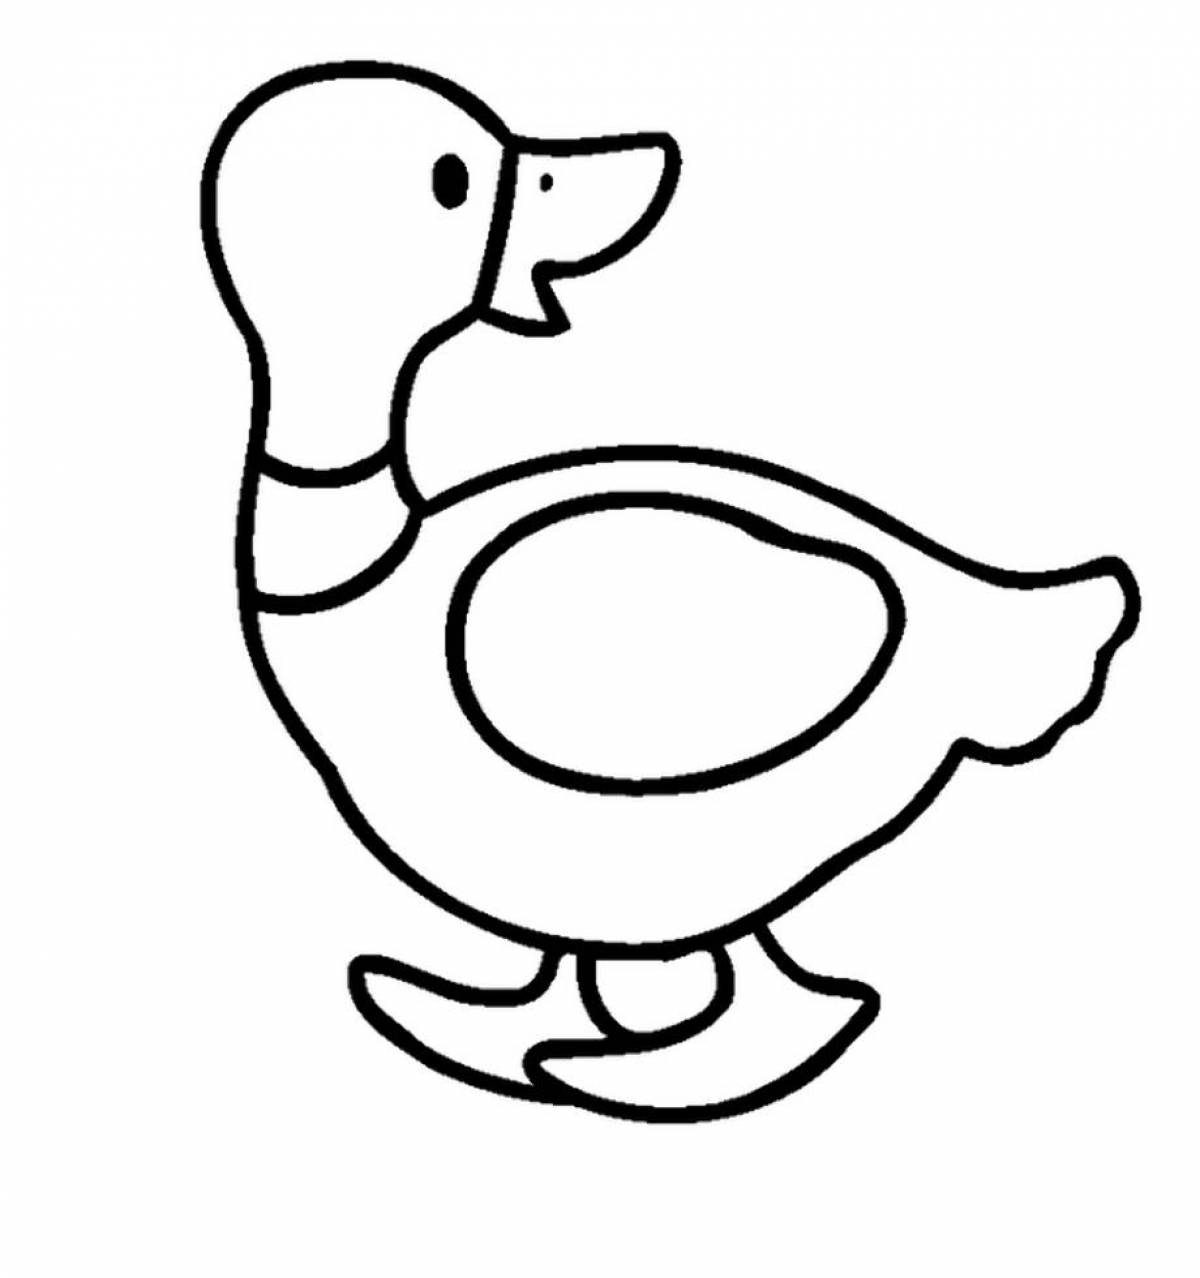 Charming duck lalaphan coloring pages